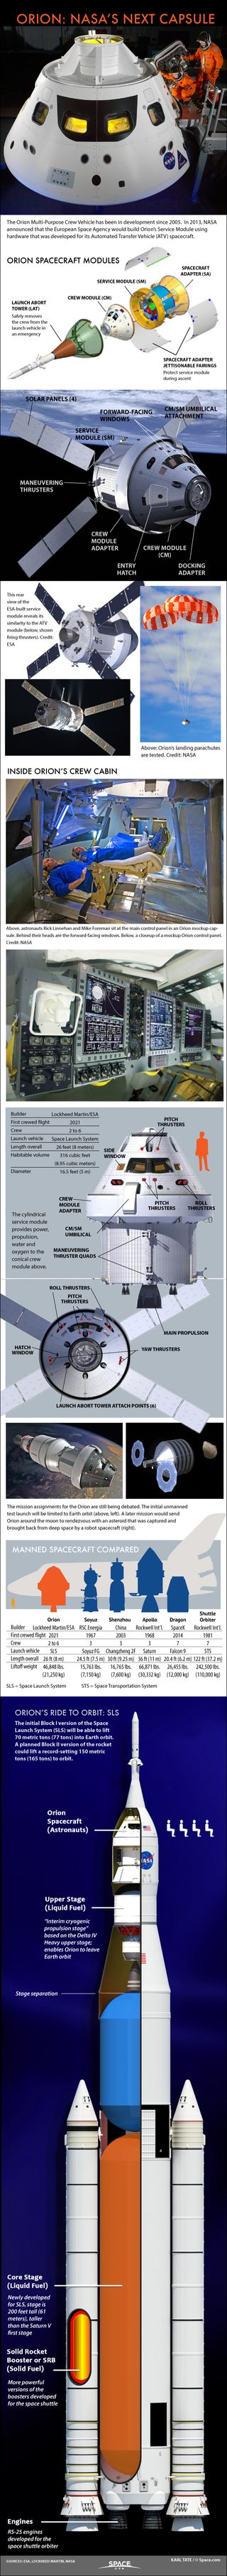 See how NASA's new Multi-Purpose Crew Vehicle, based on the Orion capsule, stacks up against other crewed spaceships in this SPACE.com infographic.